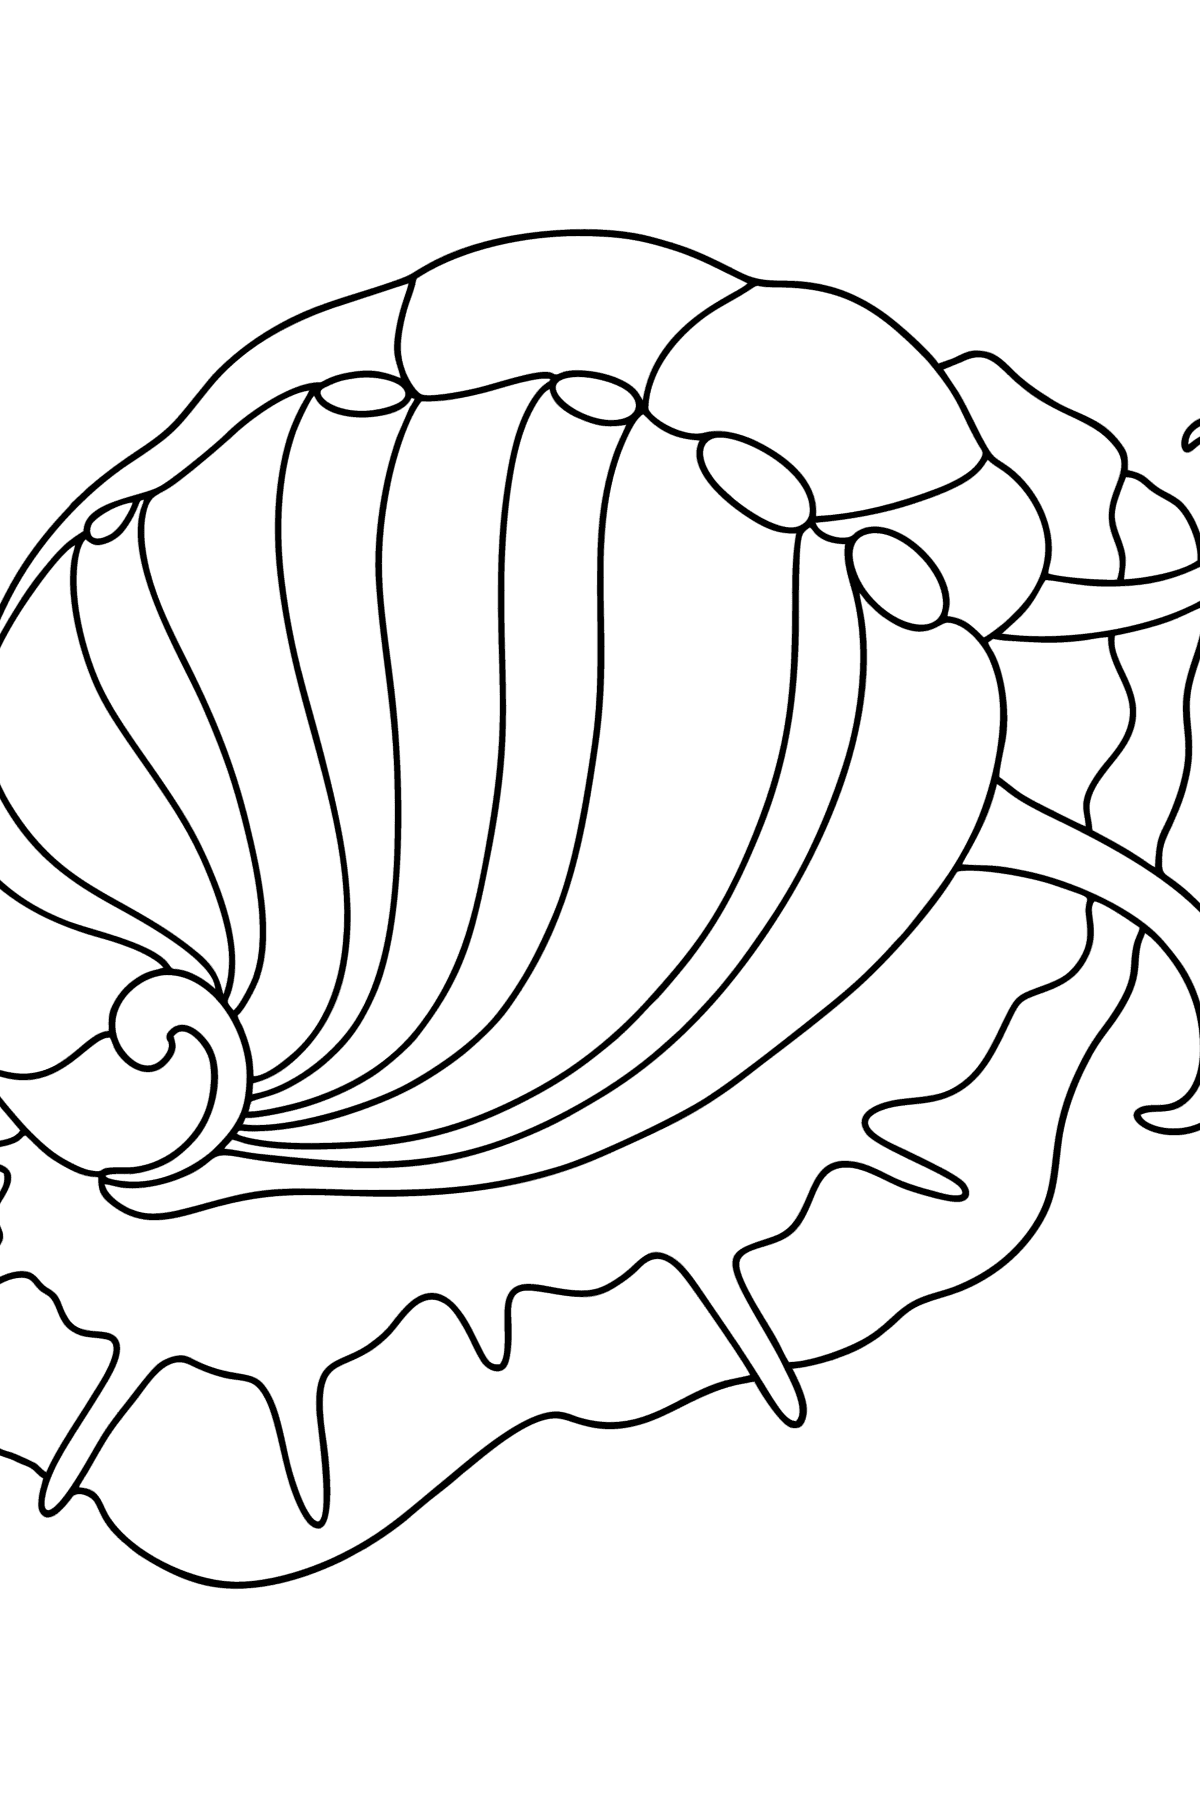 Mollusk abalone coloring page - Coloring Pages for Kids